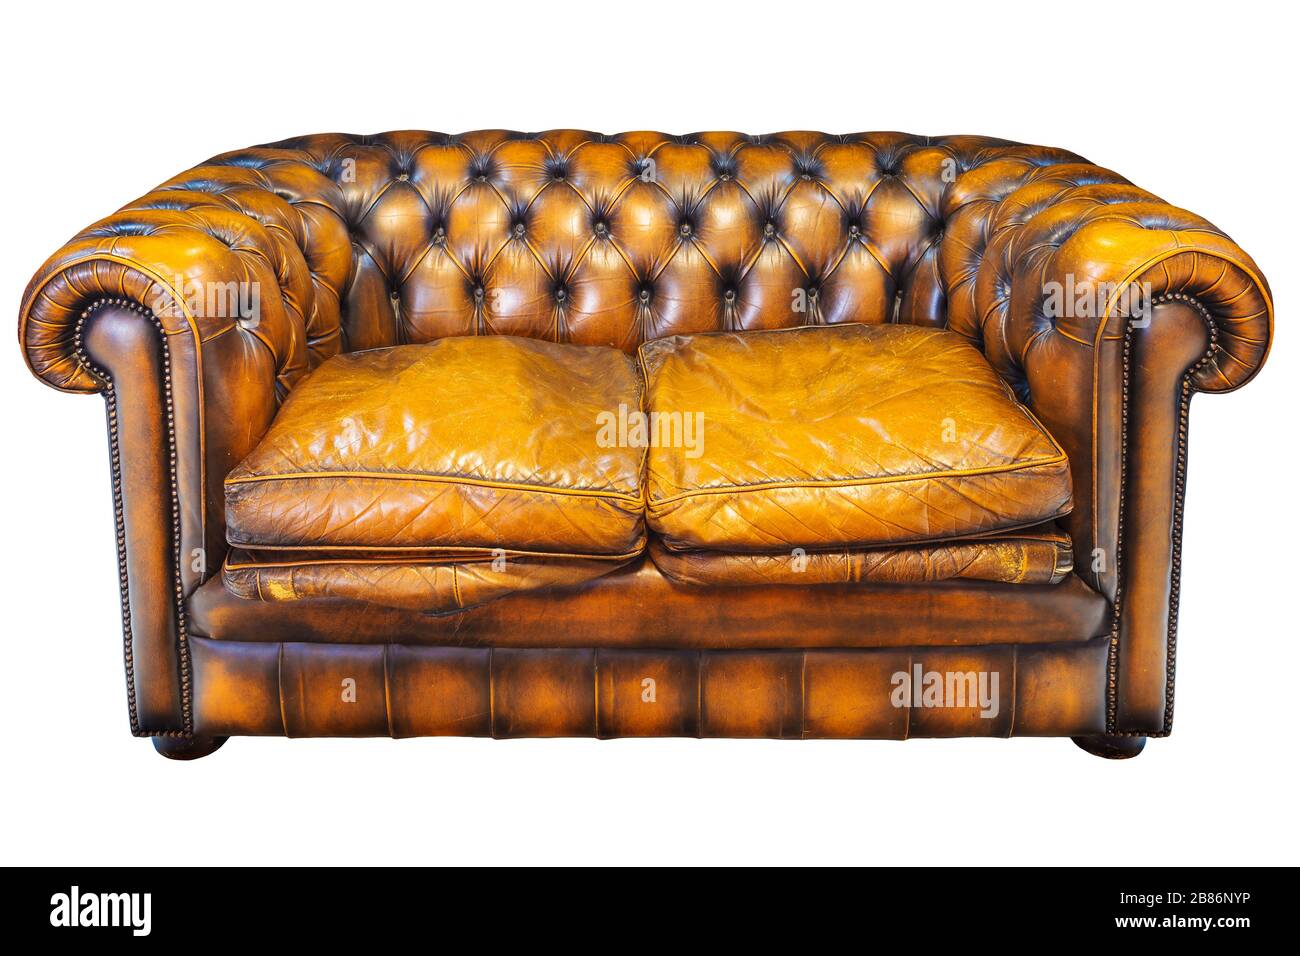 Vintage brown leather Chesterfield sofa isolated on a white background  Stock Photo - Alamy